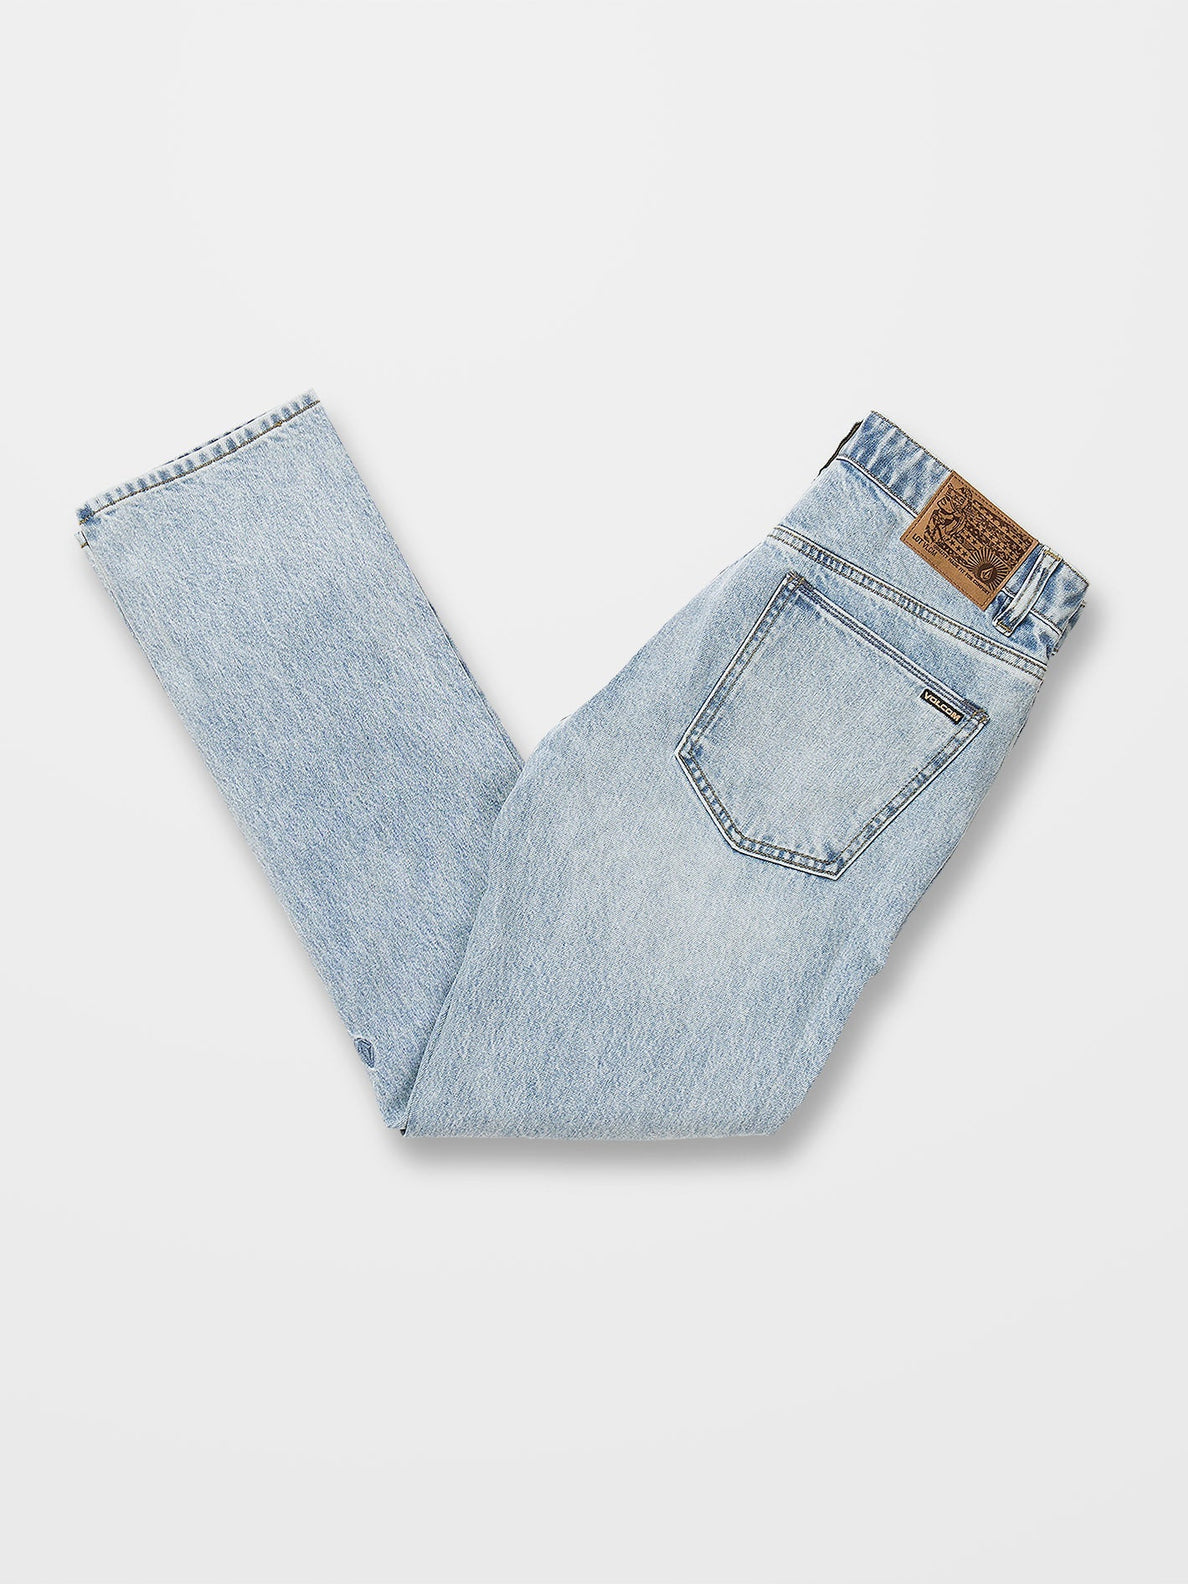 Vorta Jeans - HEAVY WORN FADED (A1912302_HWR) [4]